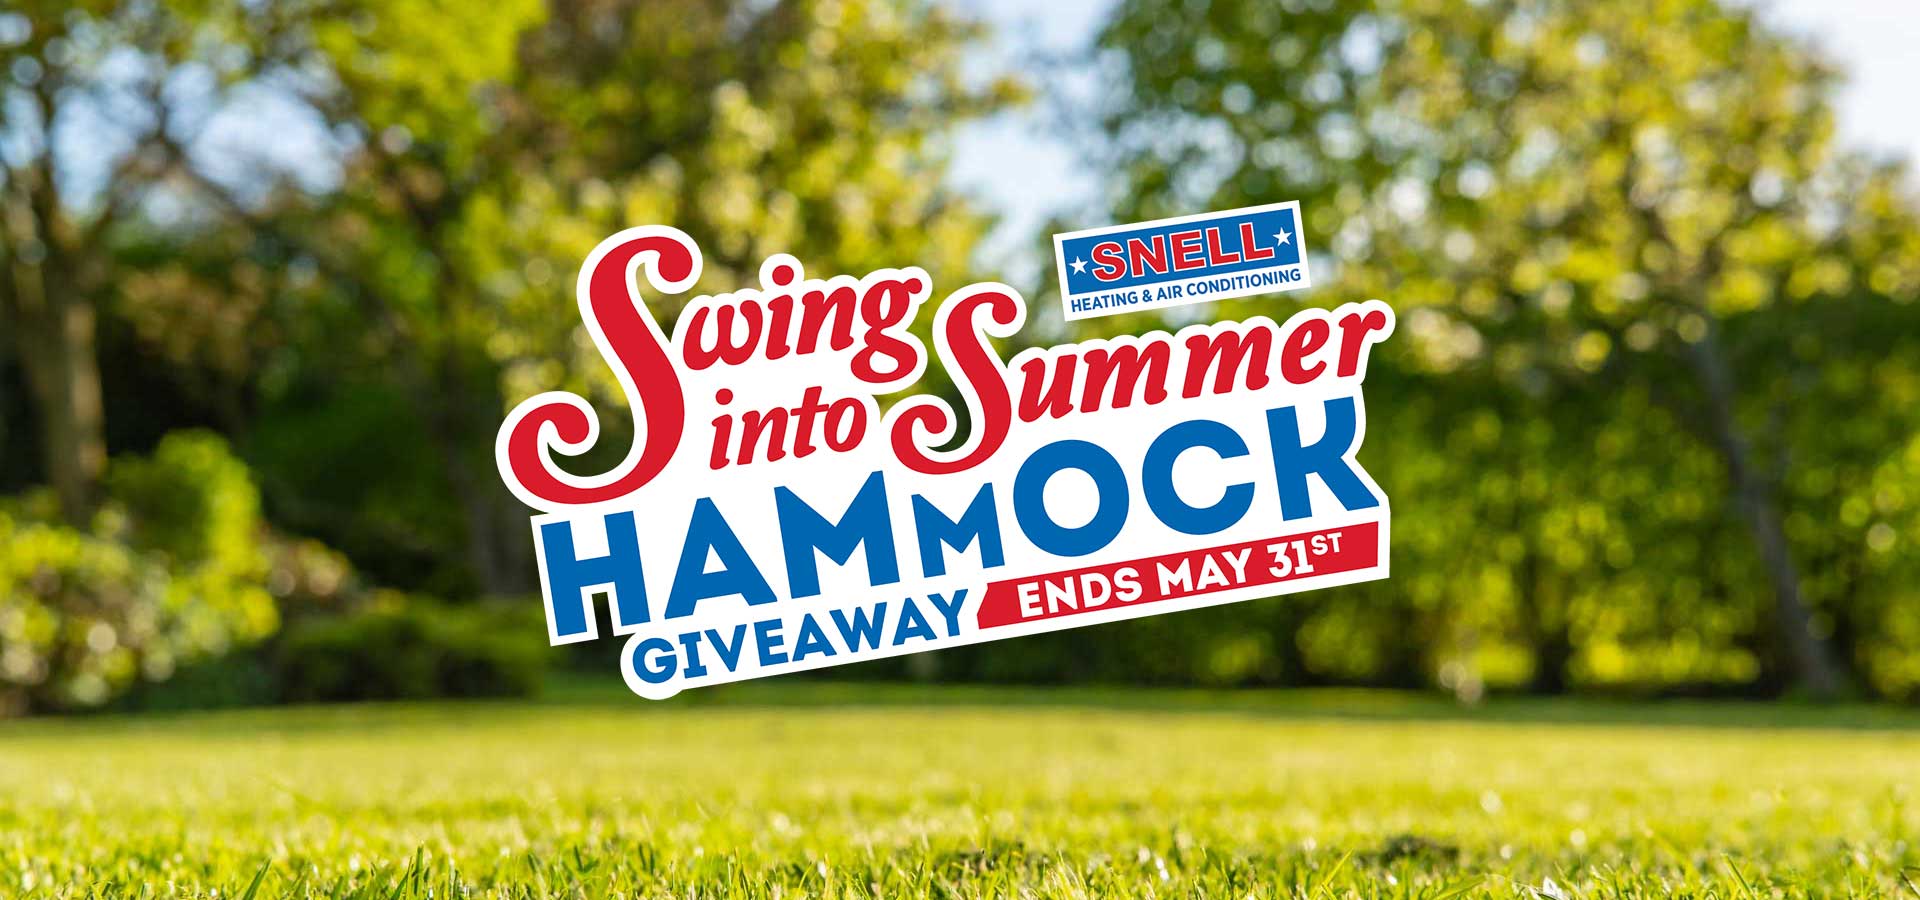 snell-may-hammock-giveaway-banner